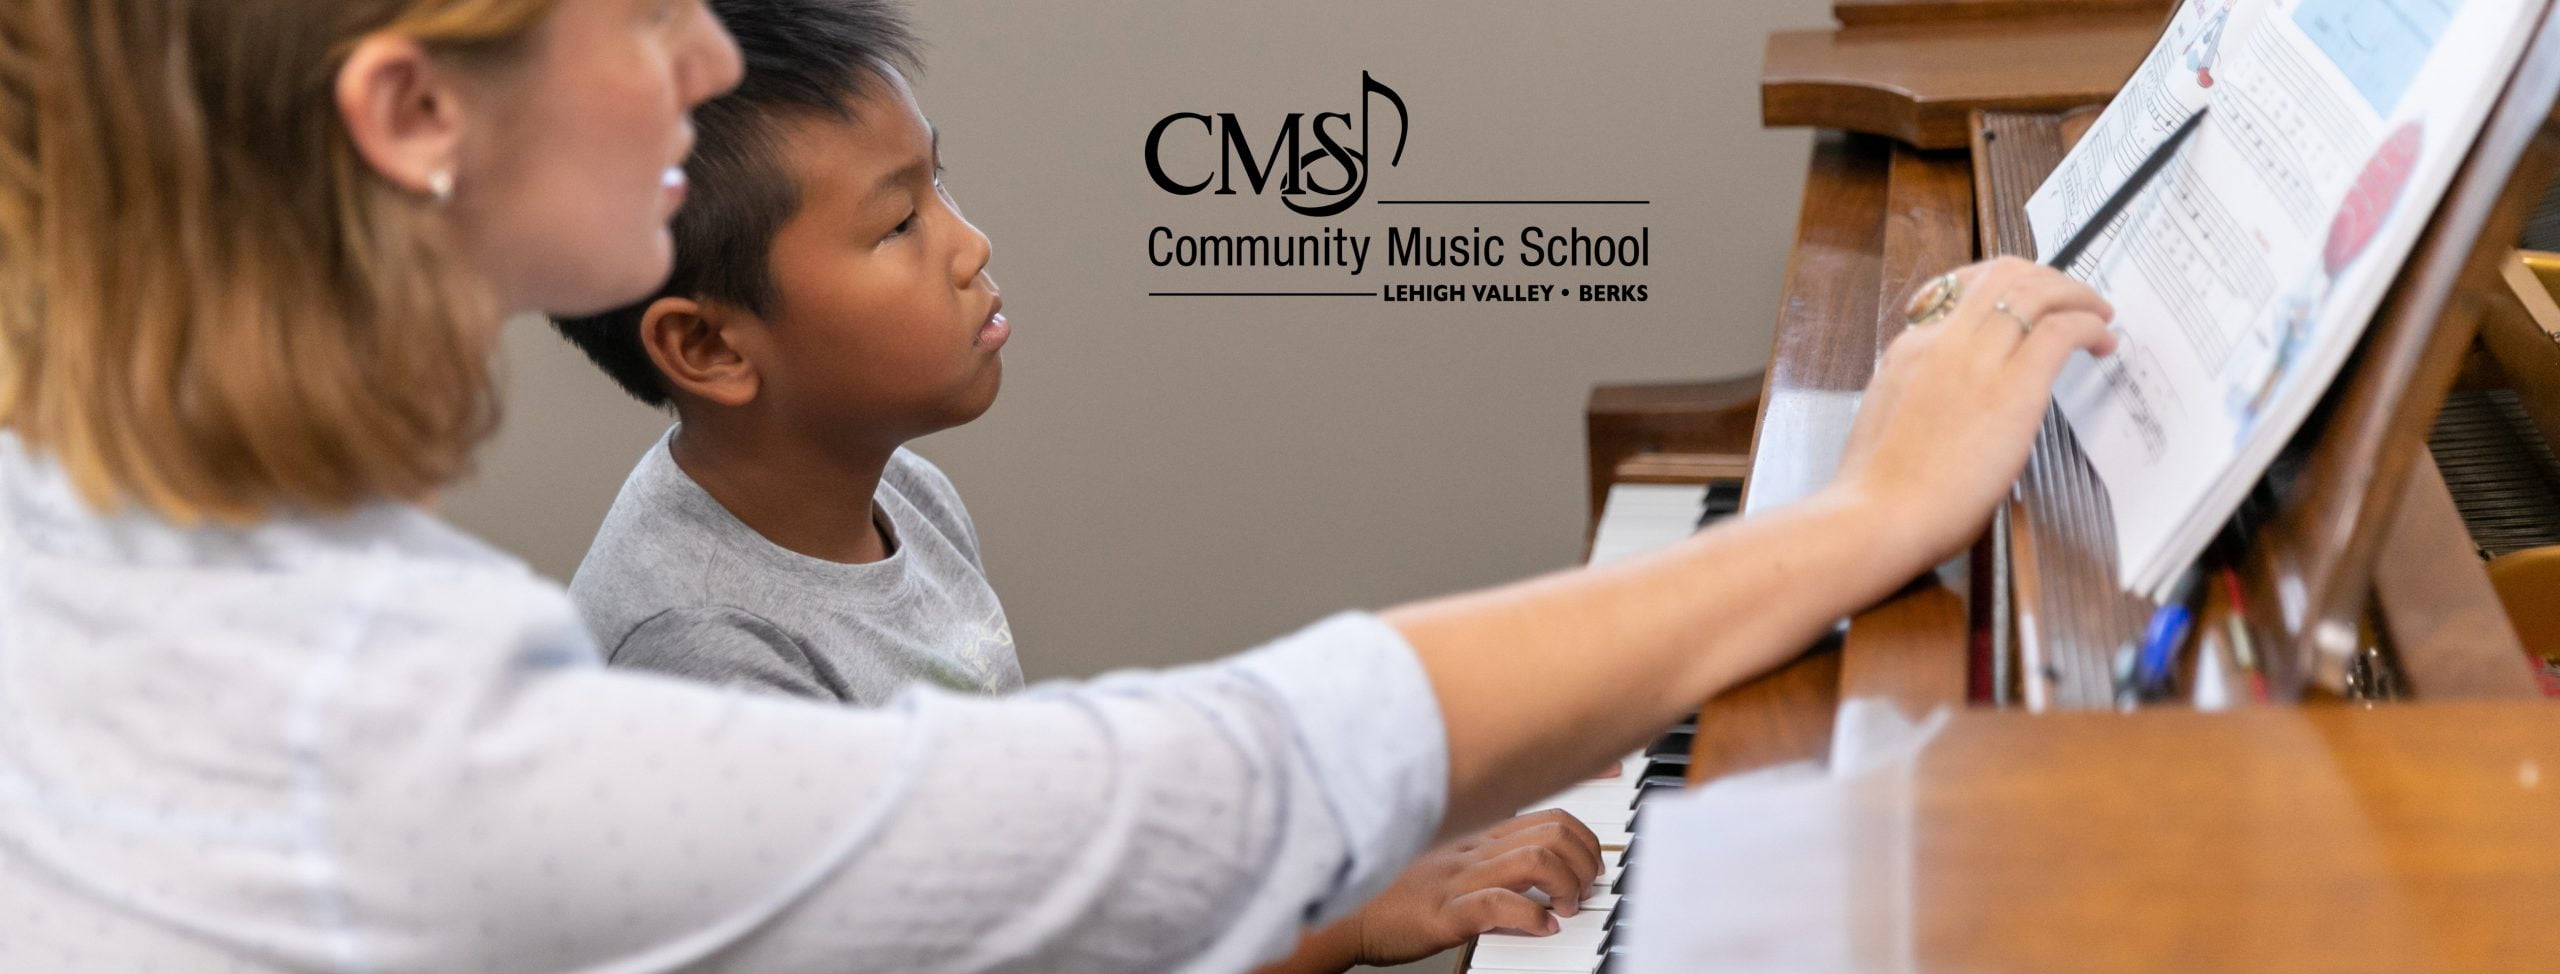 Community Music School - Kelly Hooper, a piano teacher, gives a piano lesson to a young student.